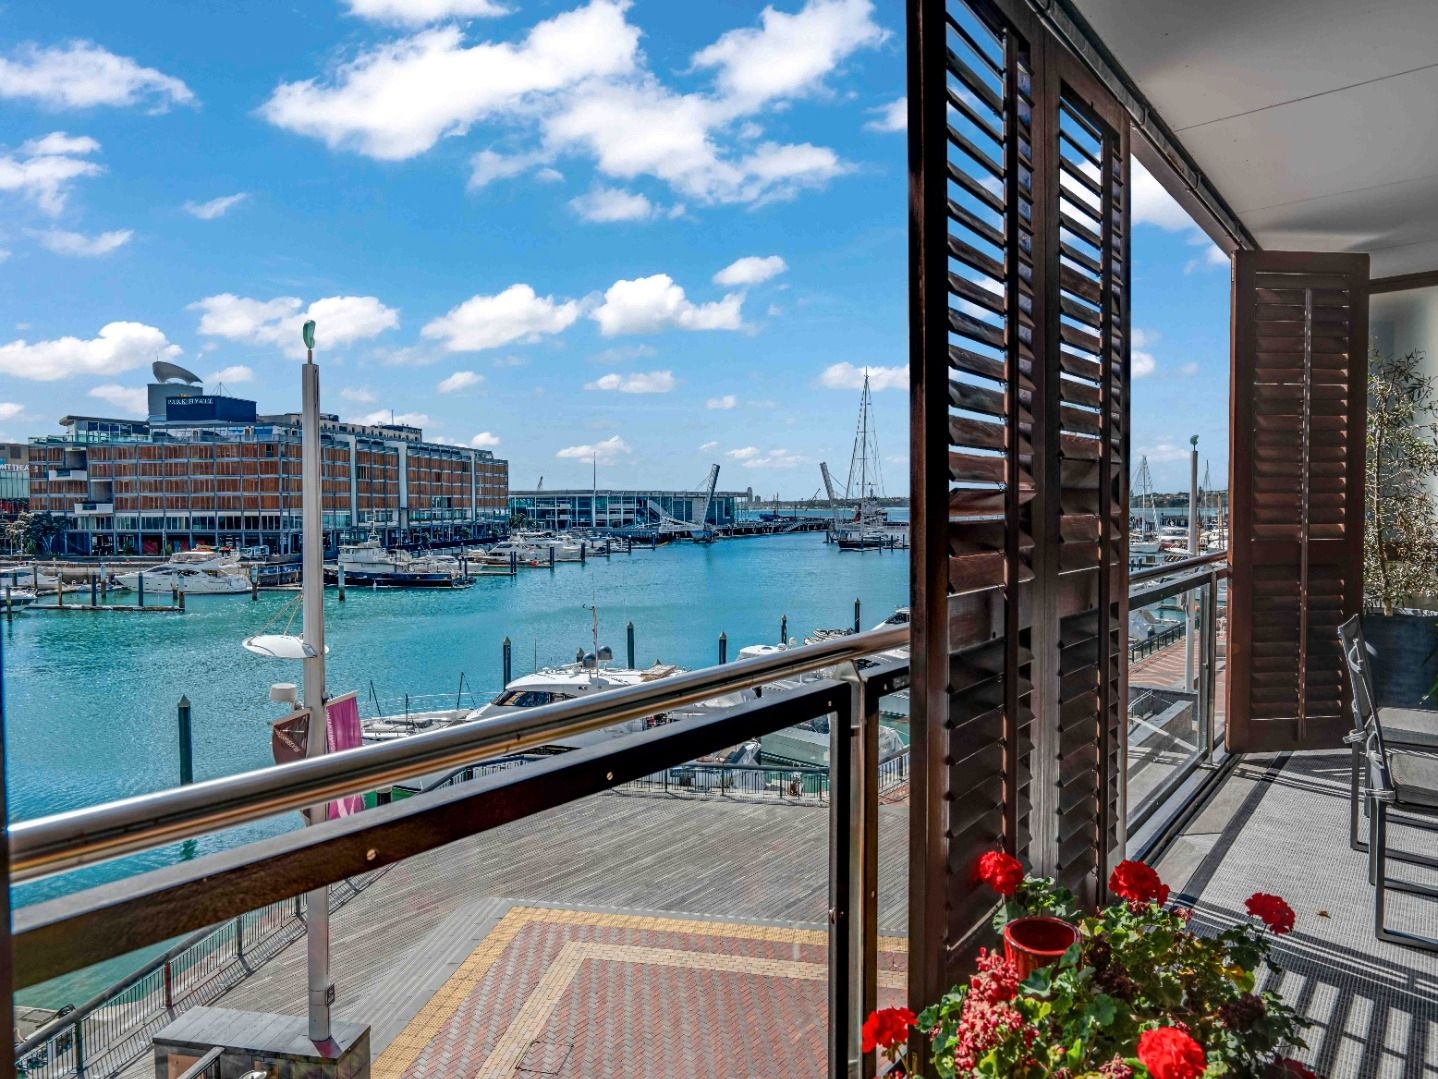 Real Estate For Rent Houses & Apartments : Viaduct living with Views! Avail to 18 June 2024.